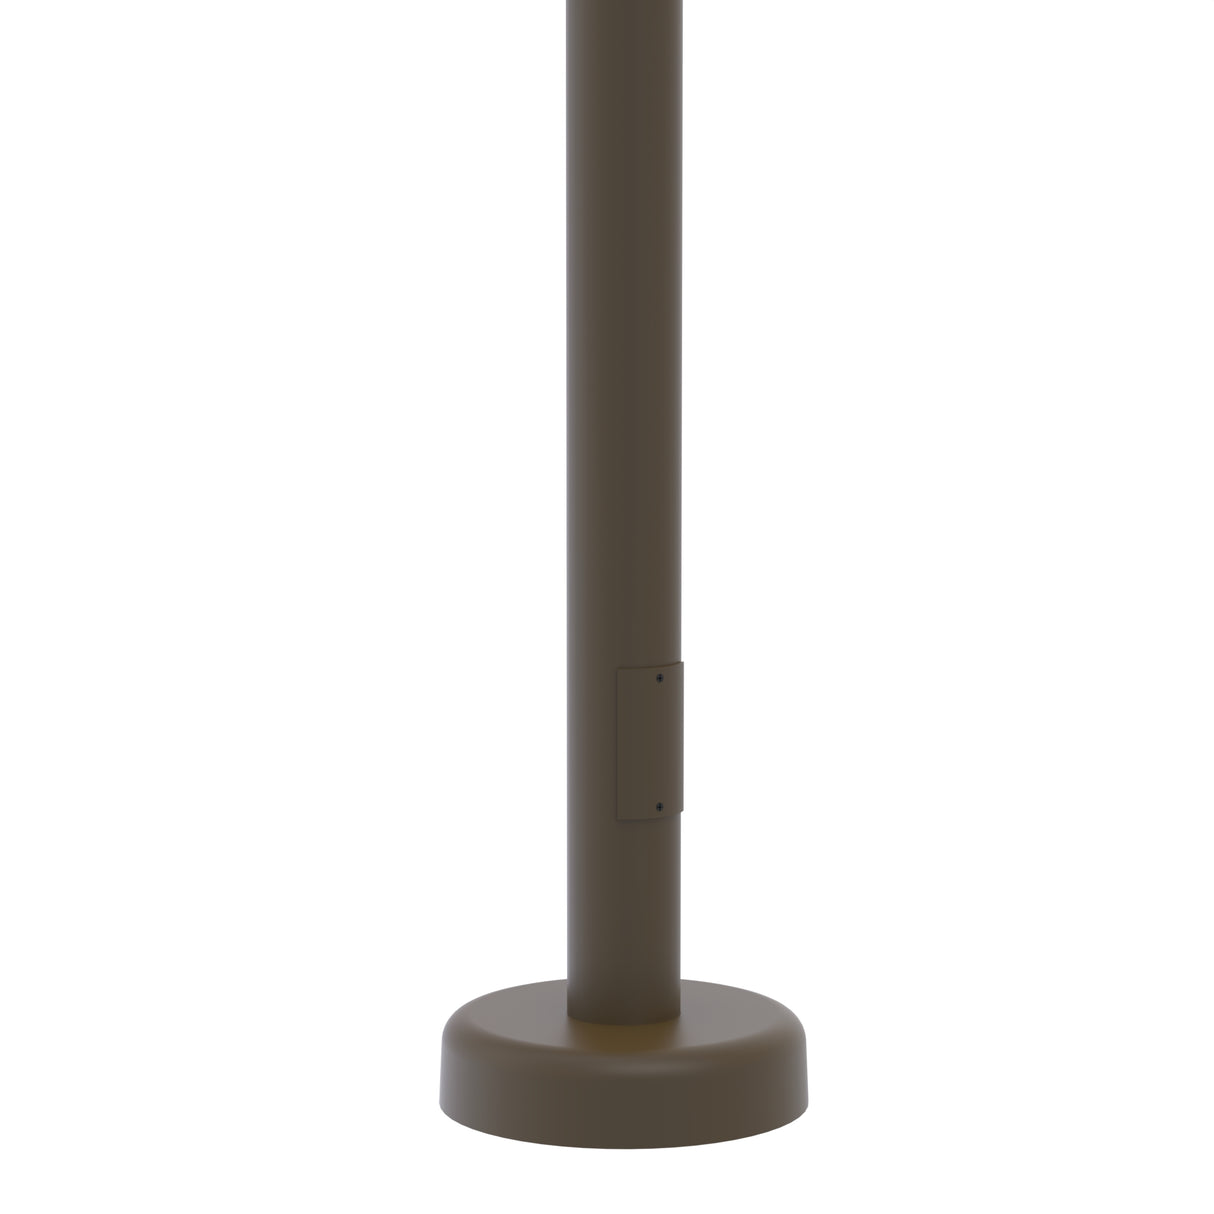 12' Tall x 5.0" Base OD x 3.0" Top OD x 0.156" Thick, Round Tapered Aluminum, Hinged Anchor Base Light Pole